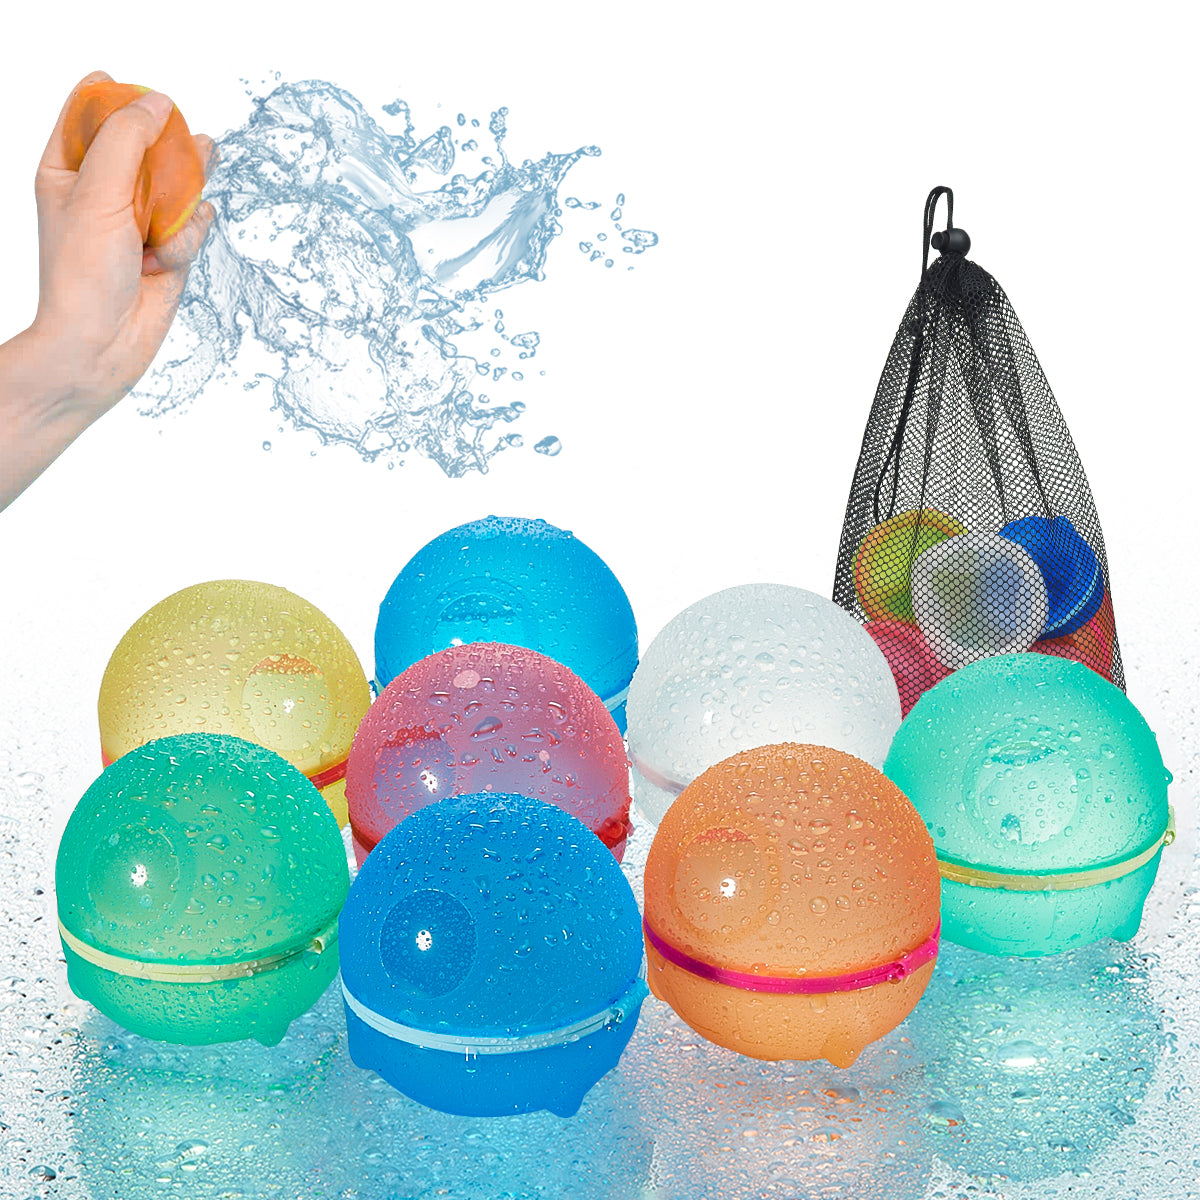 Hiliop Reusable Water Balloons Refillable Magnetic Water Balloons Self Sealing Quick Fill with Mesh Bag-Astronaut Series 8/12/16/32/48 pcs